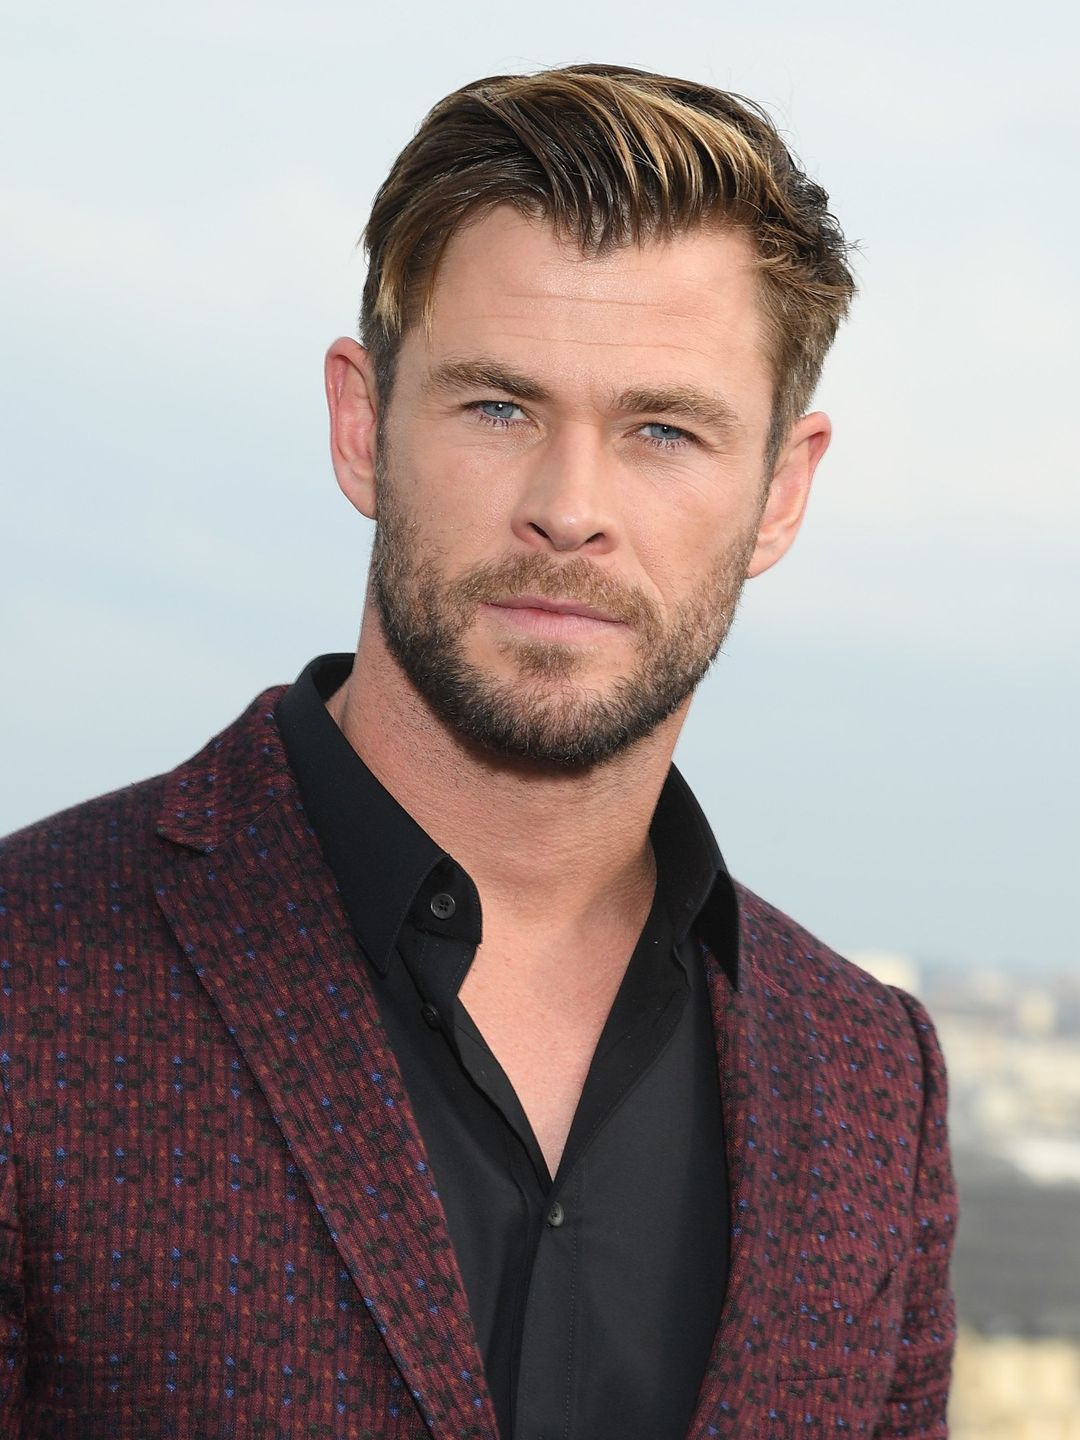 Chris Hemsworth does he have a wife